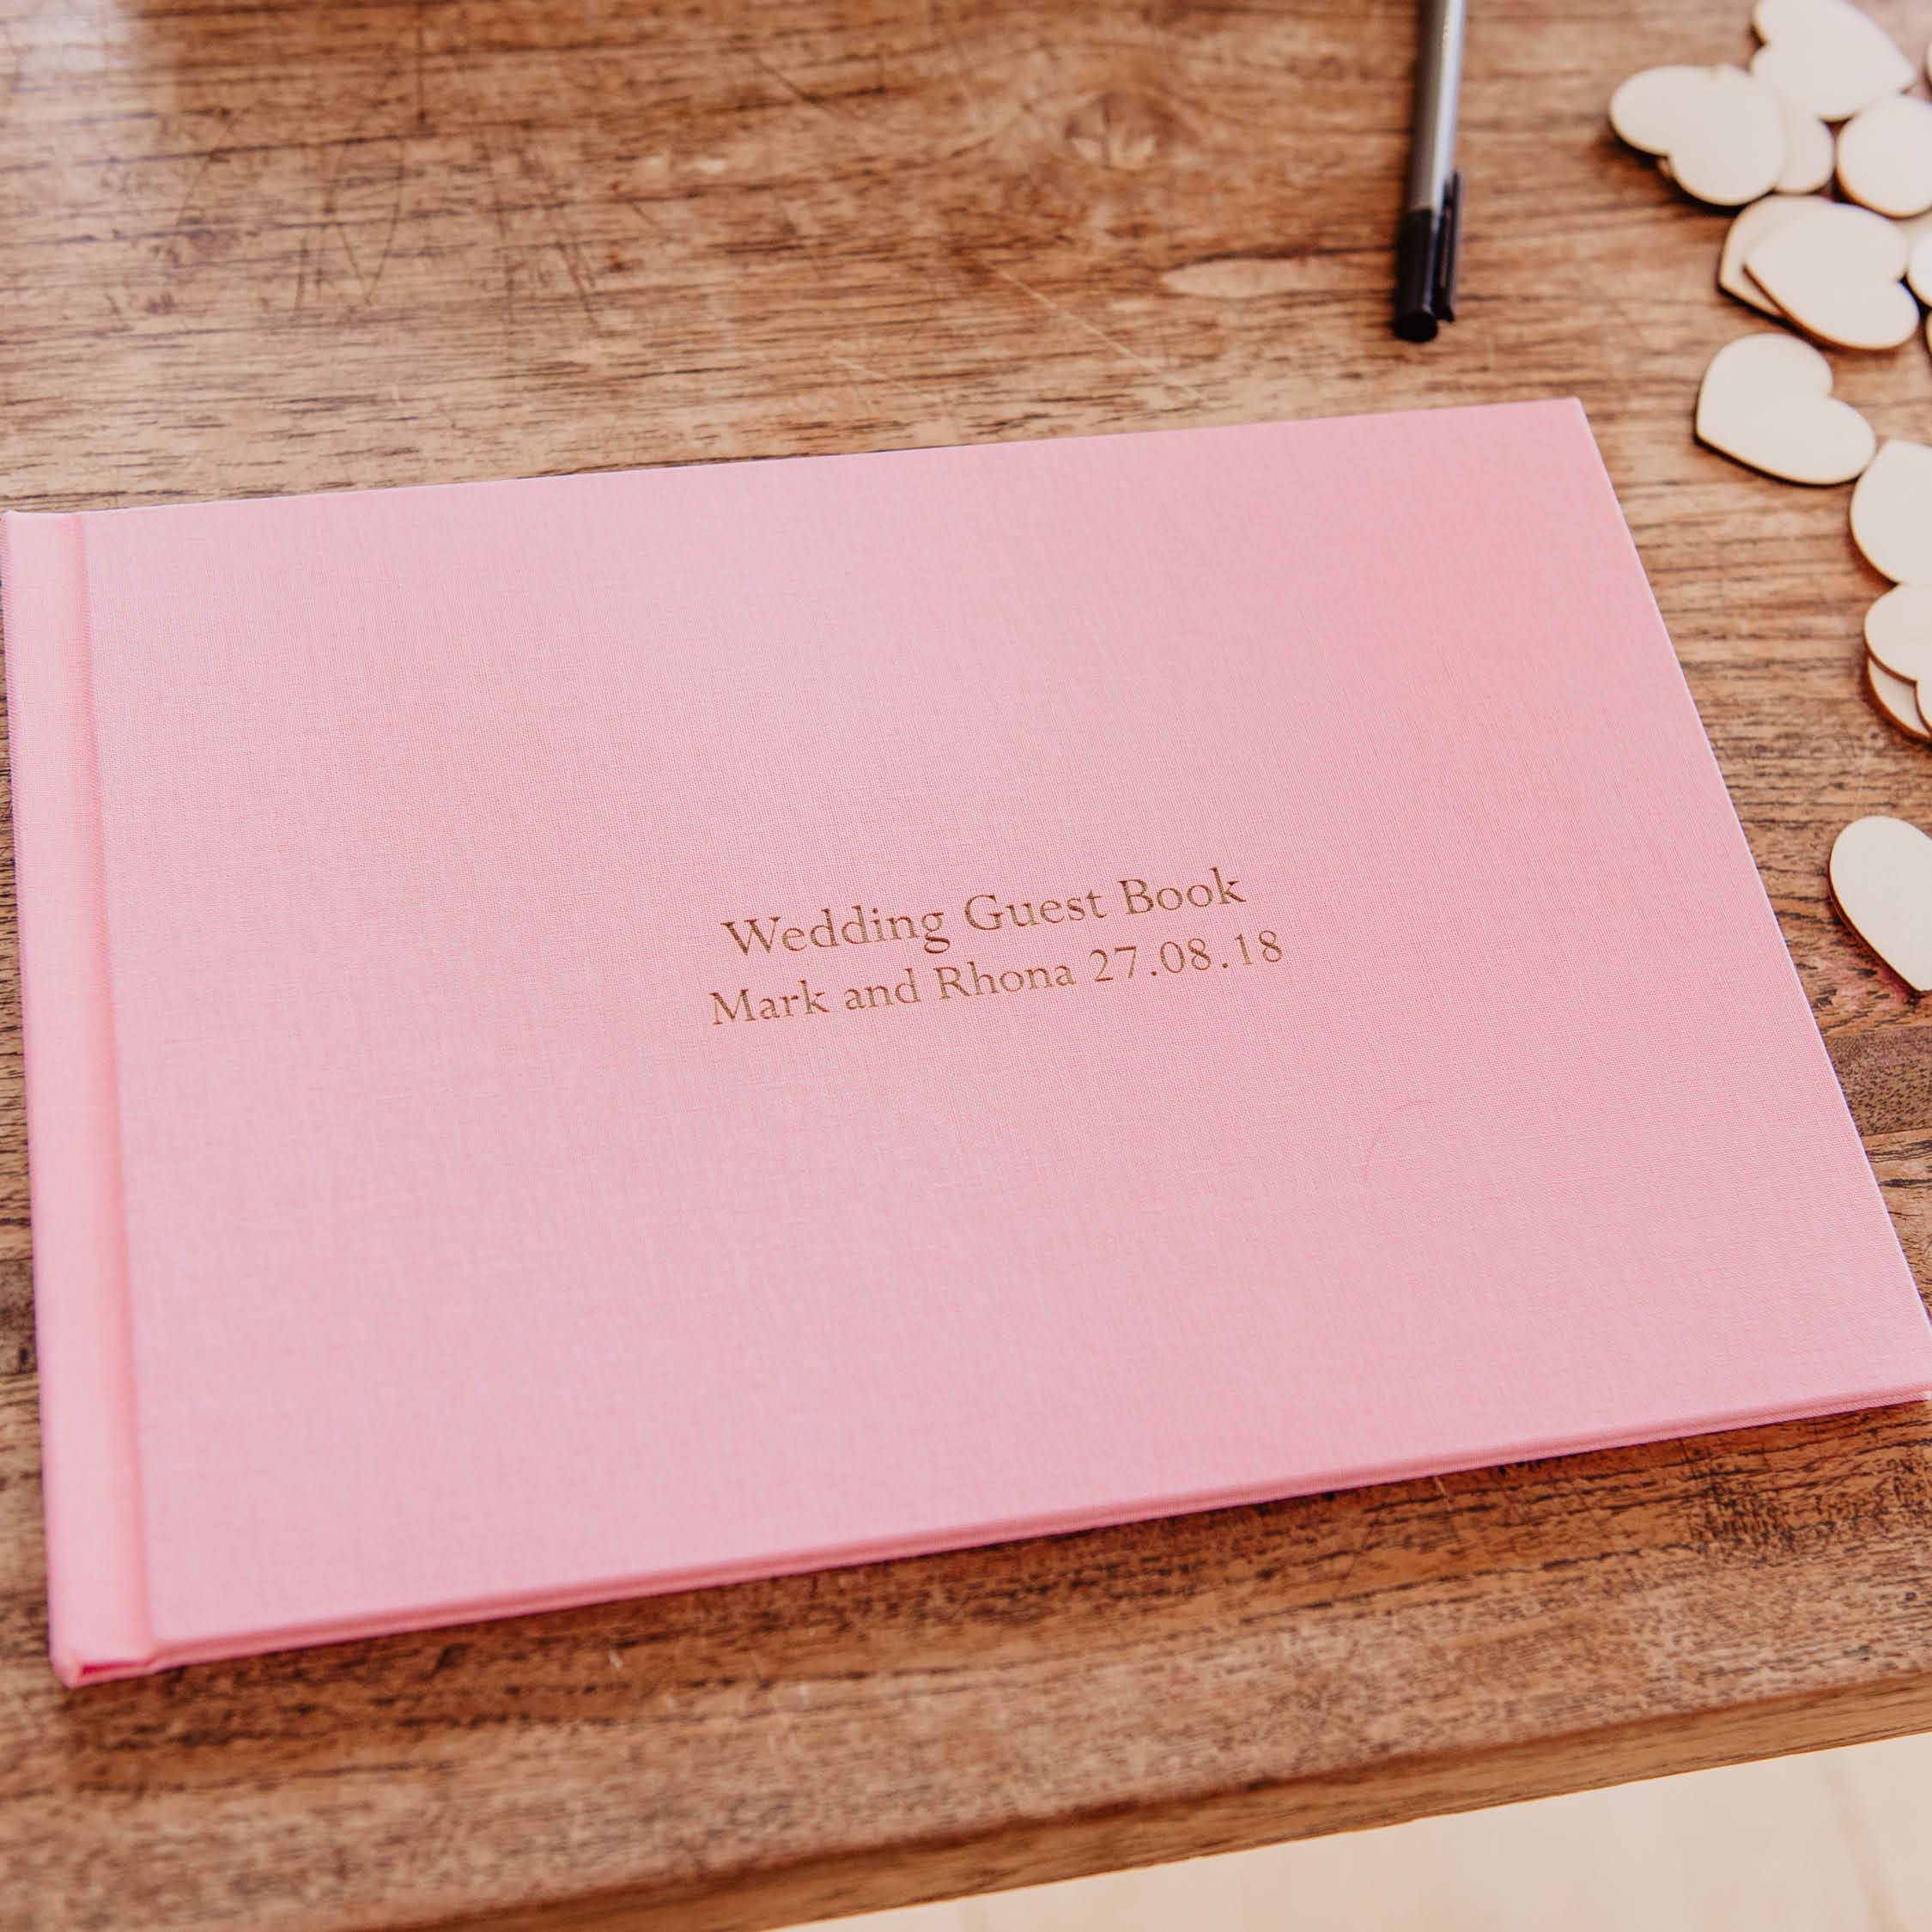 Things You'll Remember Your Big Day By in Years to Come, wedding guest boo